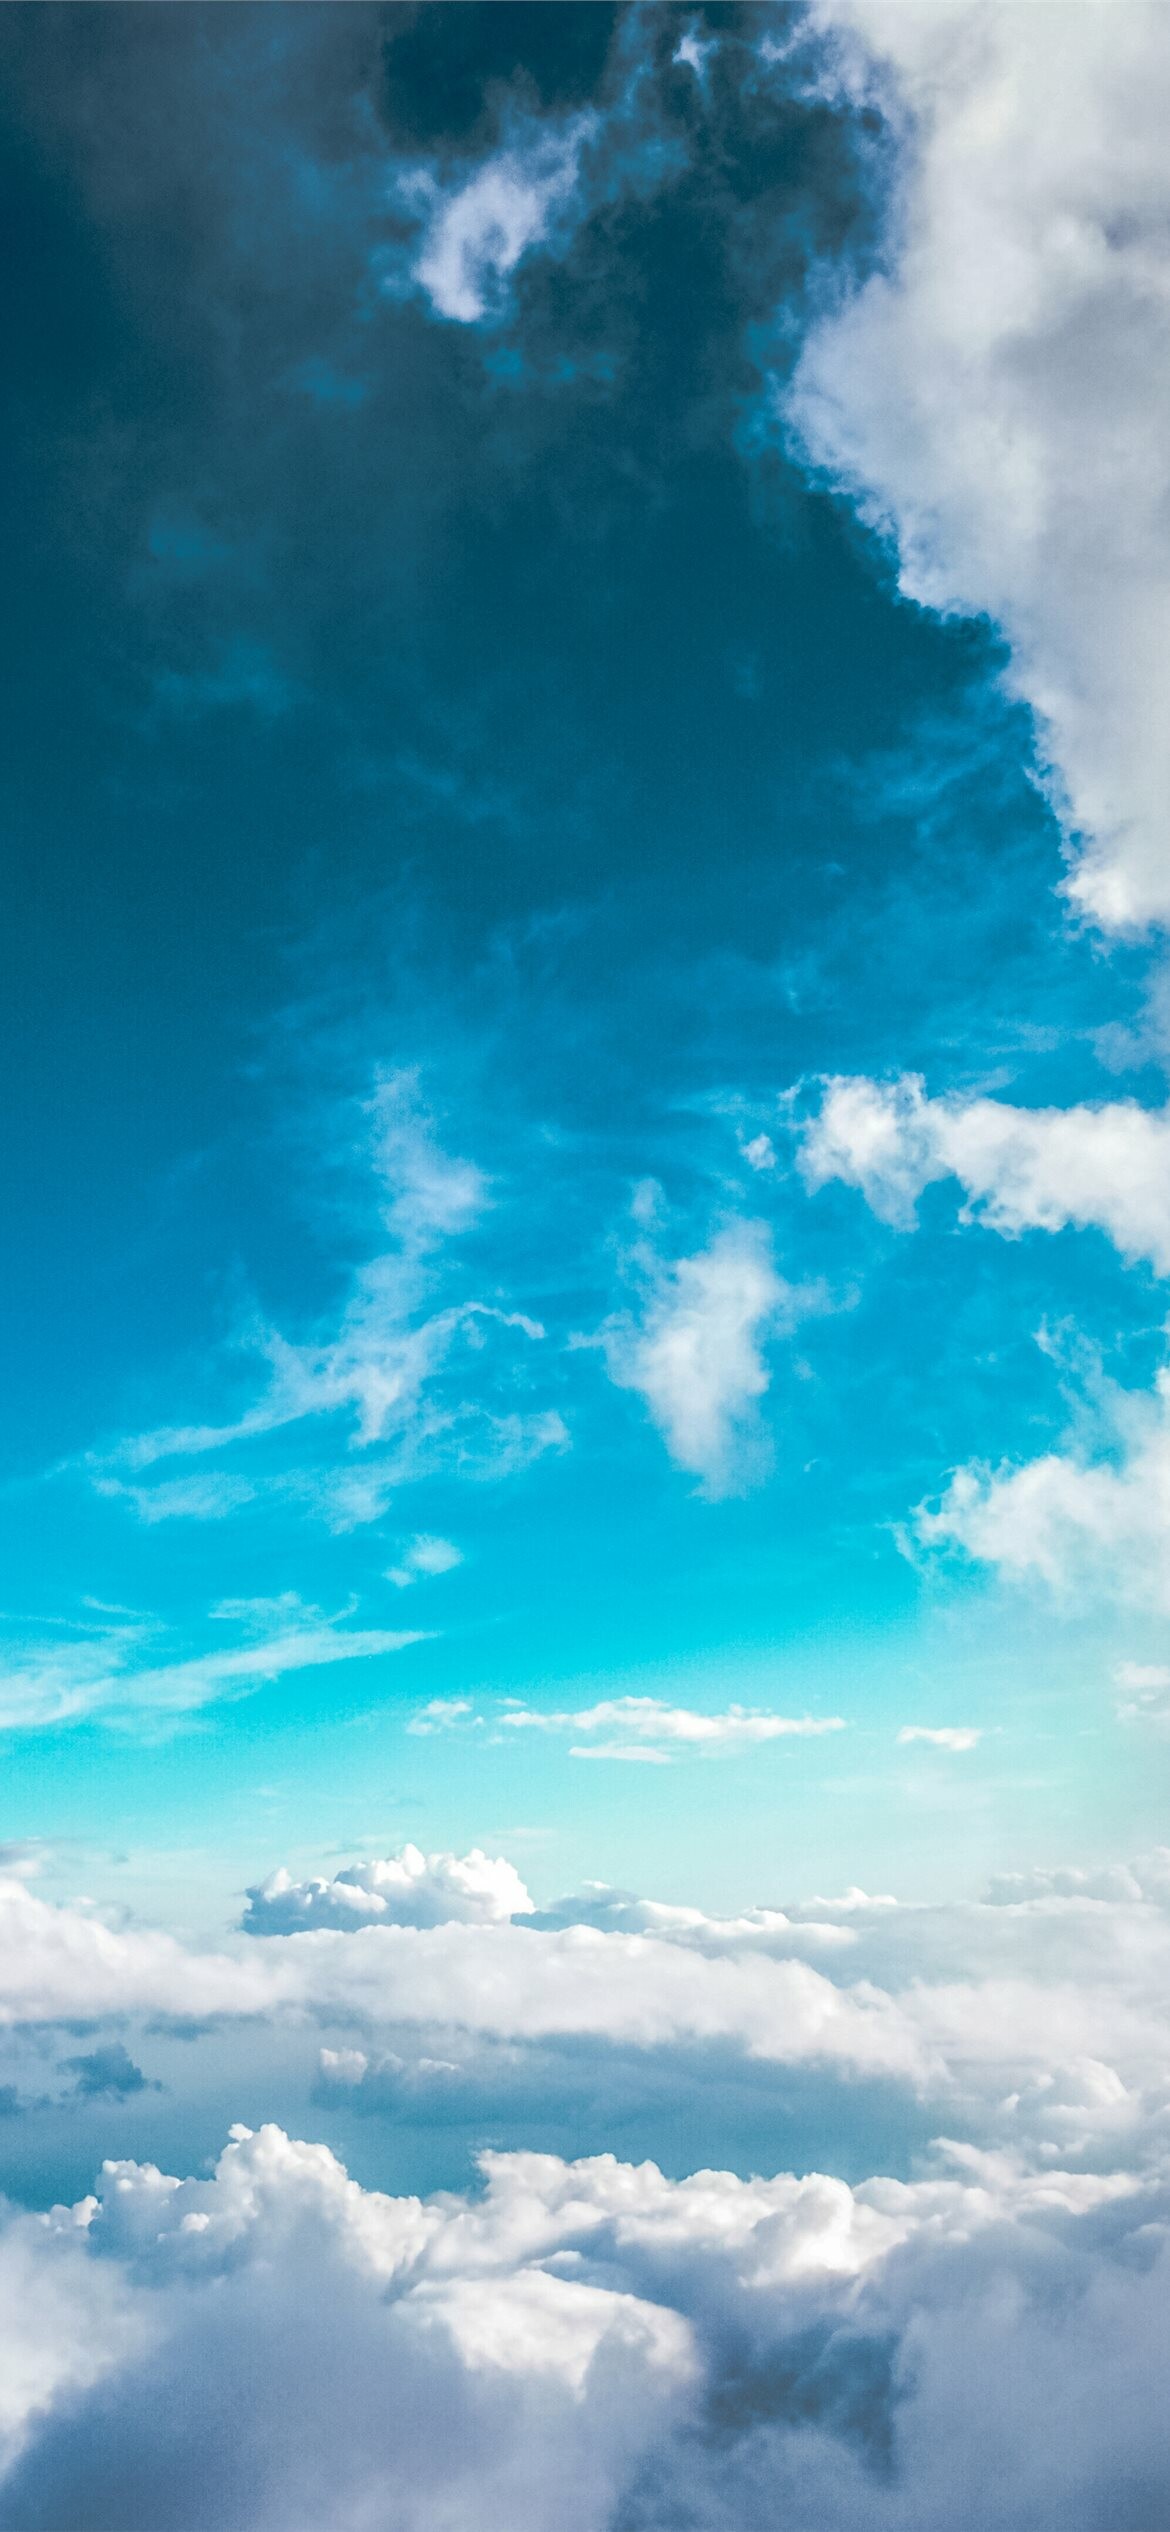 Clouds: Altocumulus can produce virga, very light precipitation that evaporates before reaching the ground. 1170x2540 HD Wallpaper.